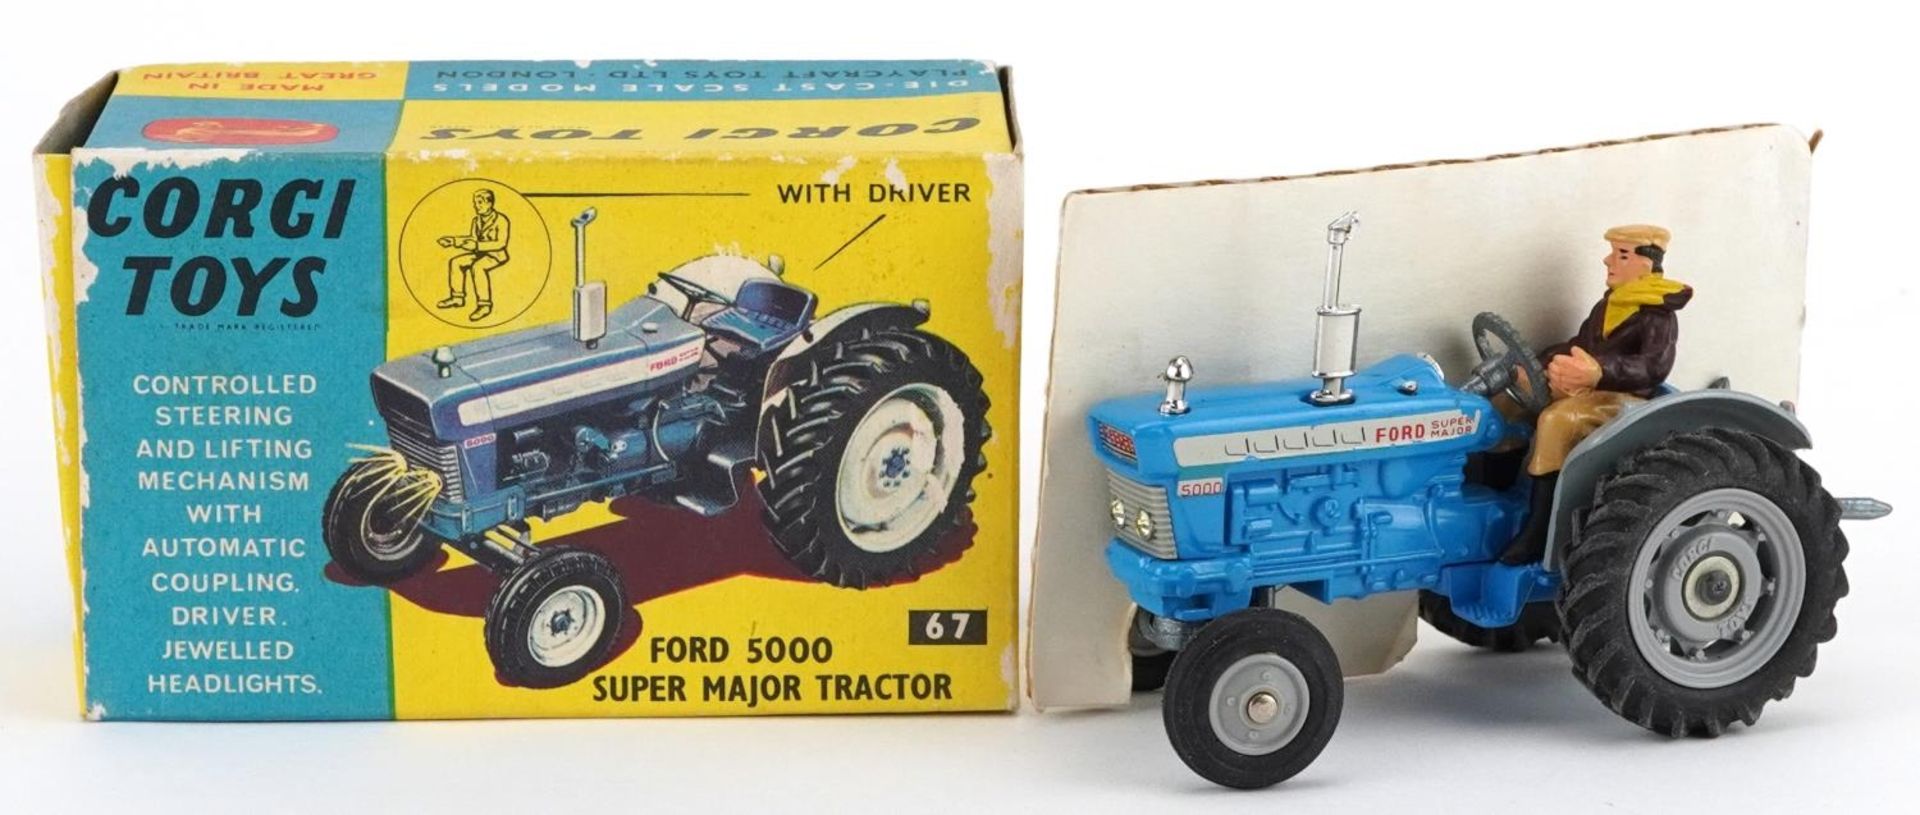 Vintage Corgi Toys diecast Ford 5000 Super Major Tractor with box numbered 67